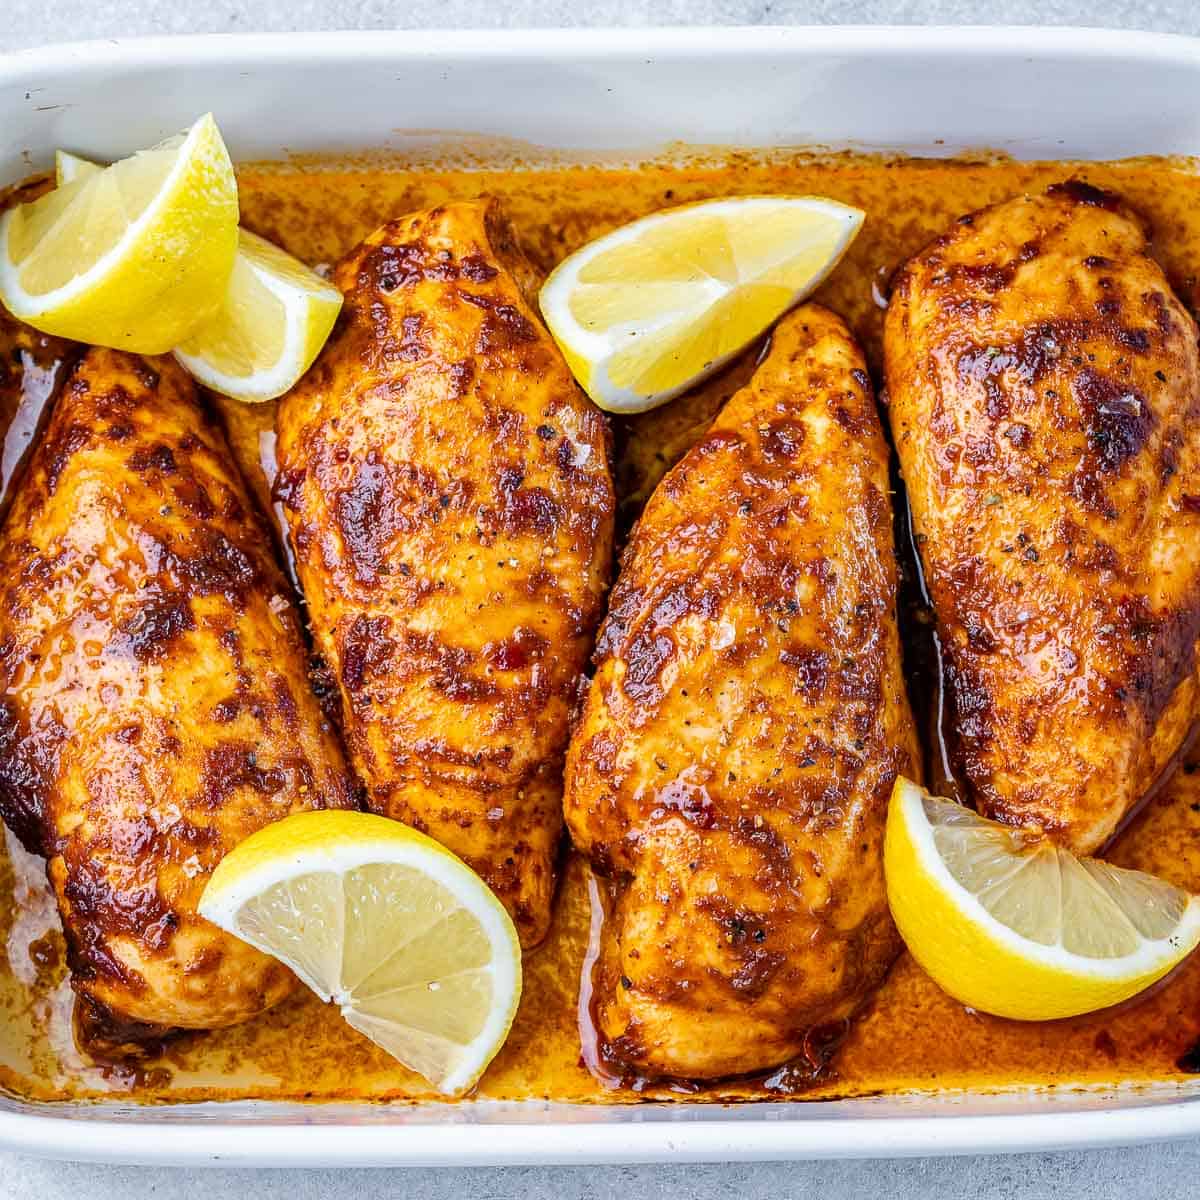 top view of 4 baked chicken breasts that are orange in color in a white dish with lemon wedges as garnishes